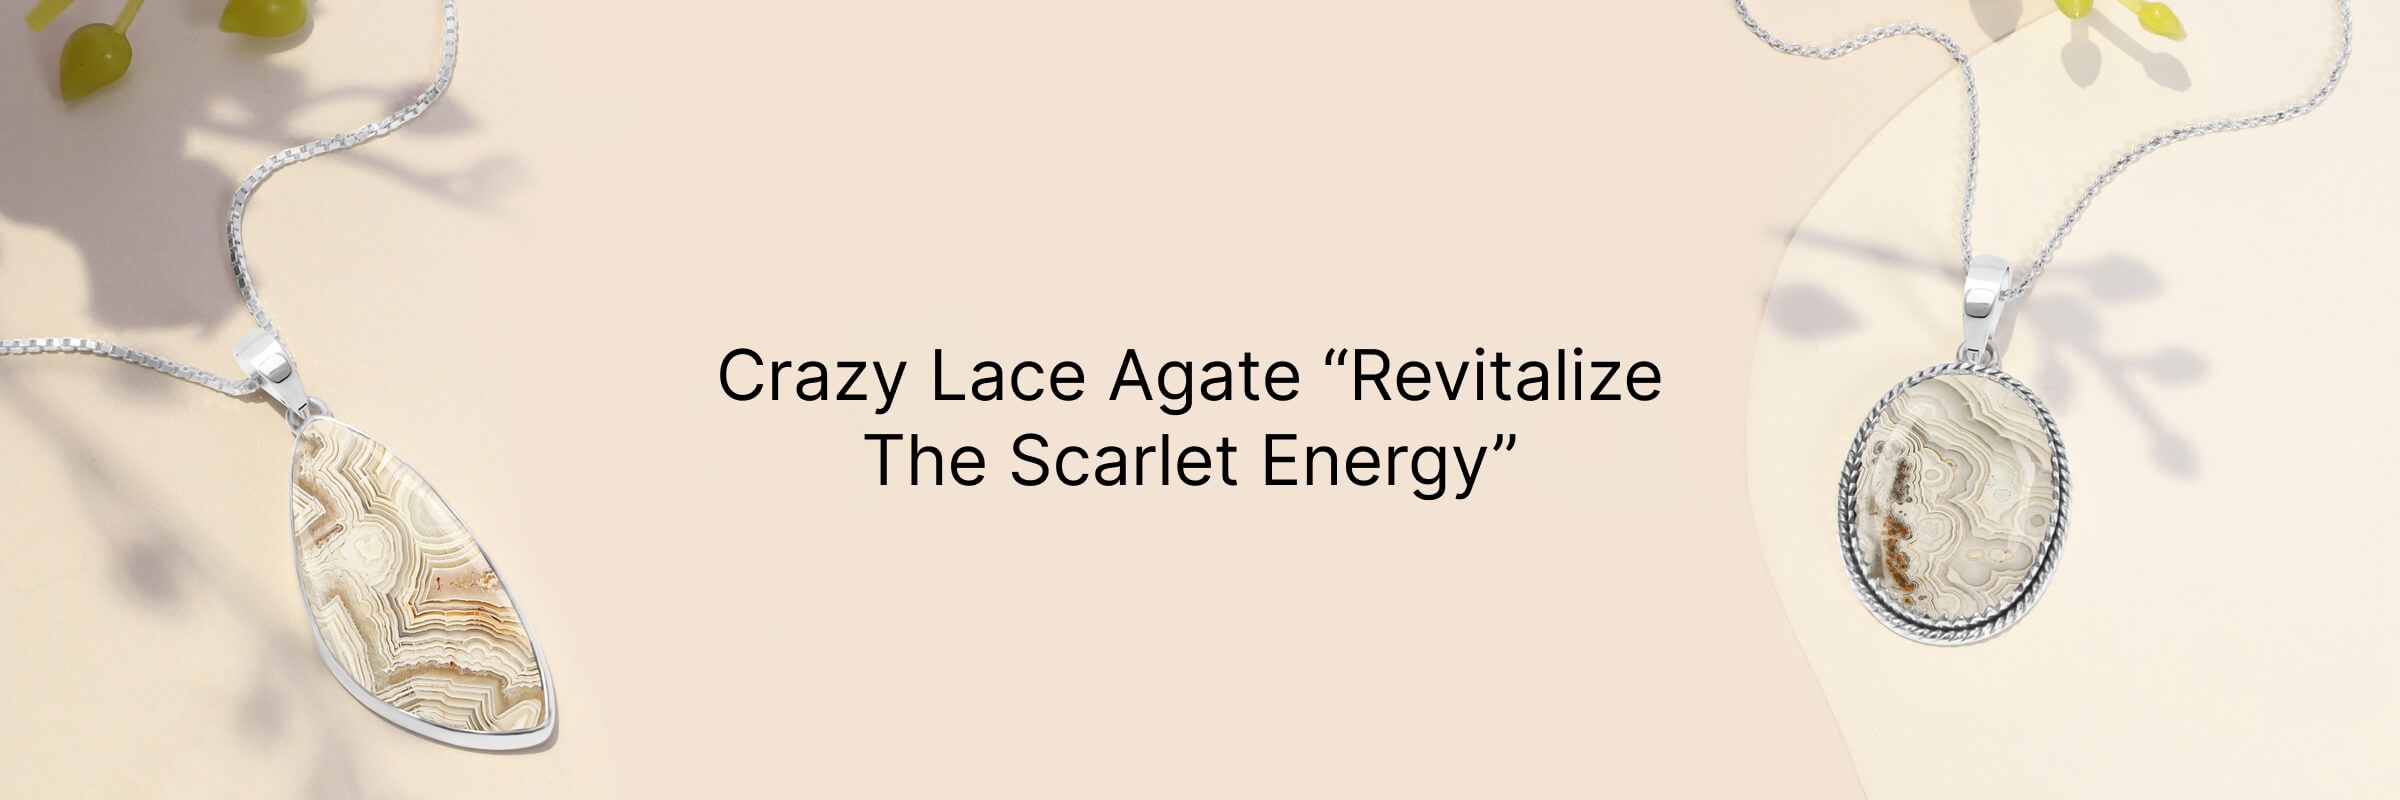 Crazy Lace Agate : Emotional and mental health benefits